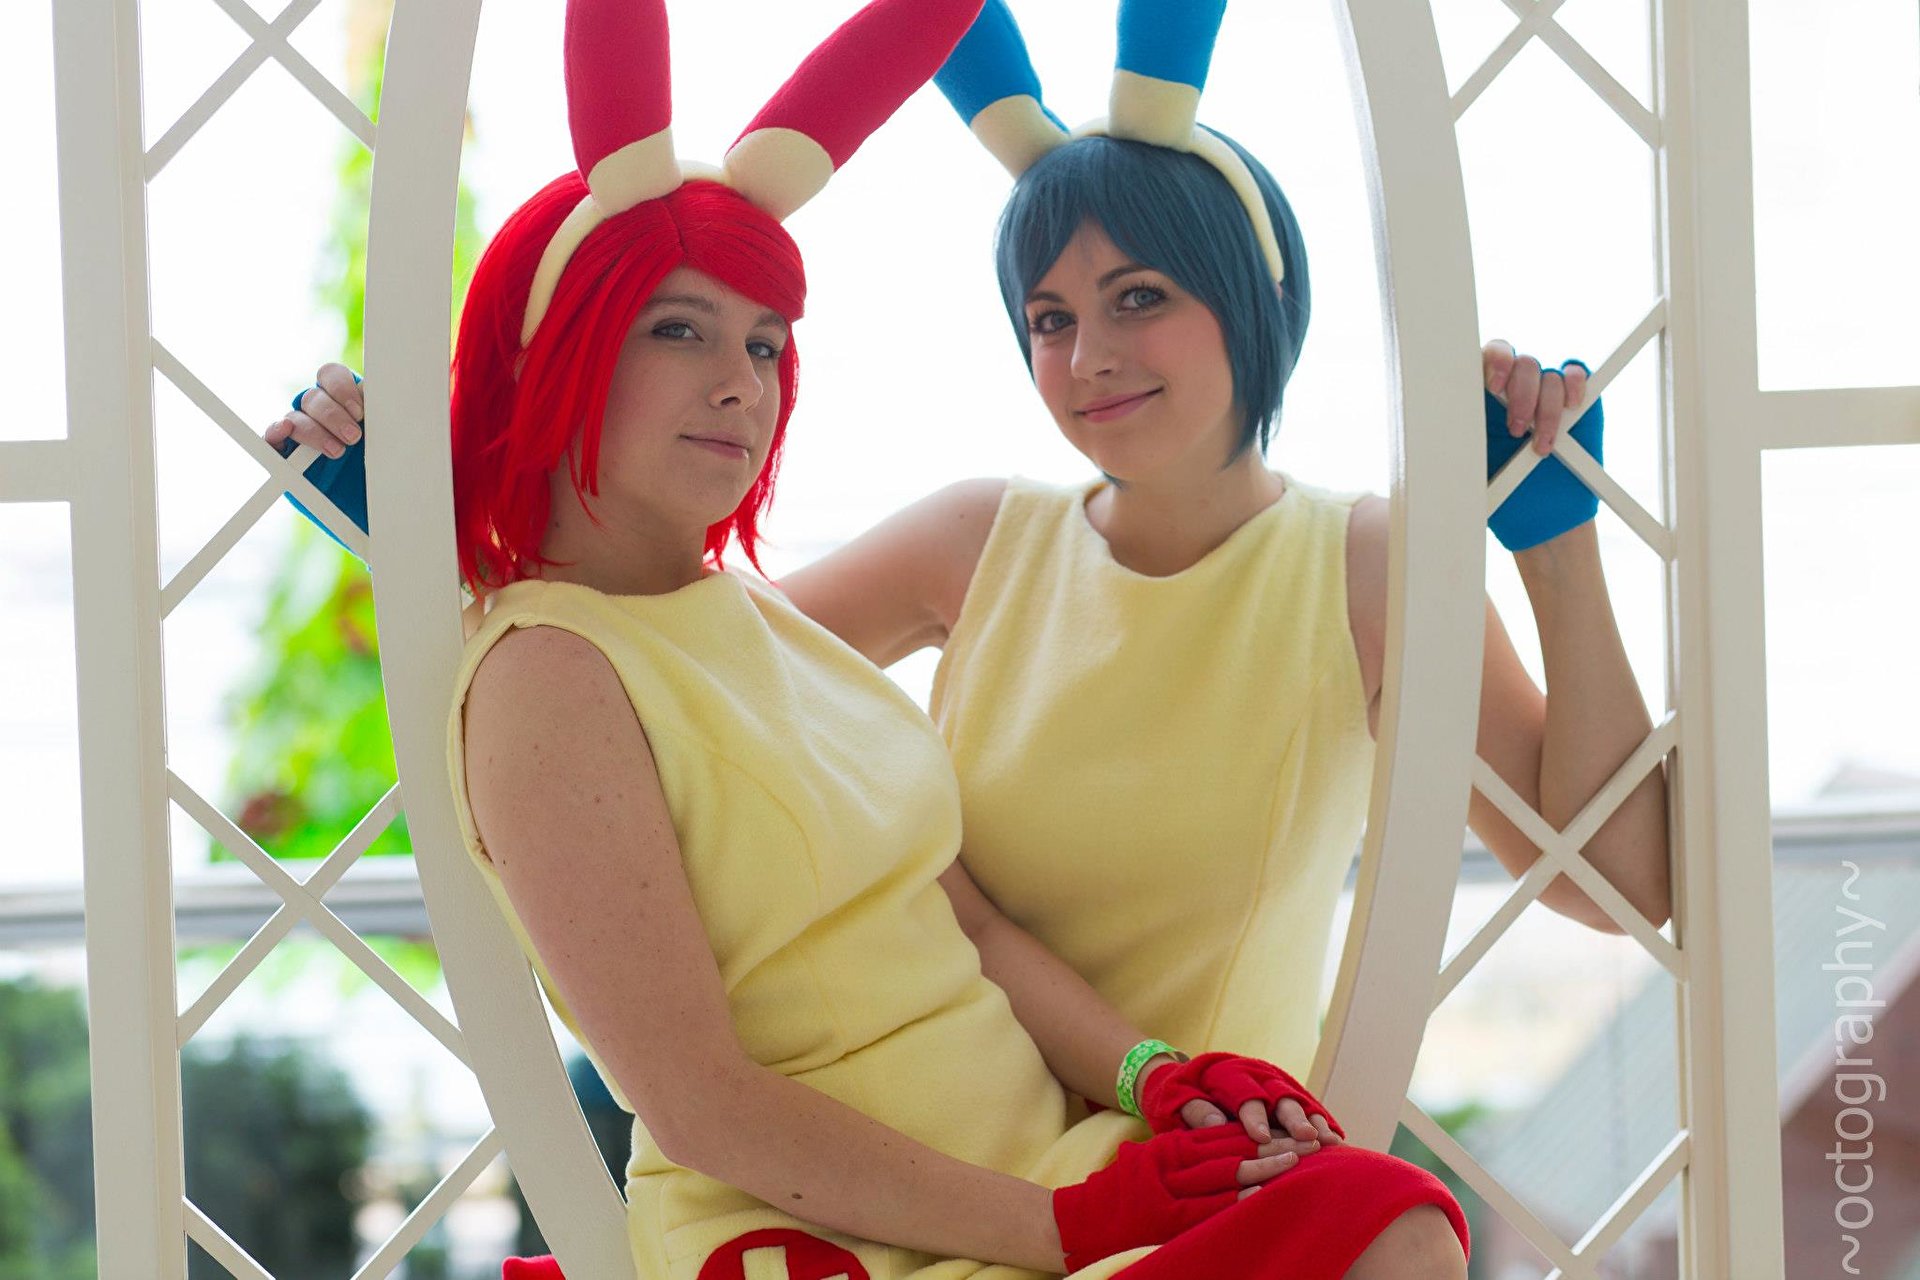 Cospix.net photo featuring Octography and Brie-chan Cosplay